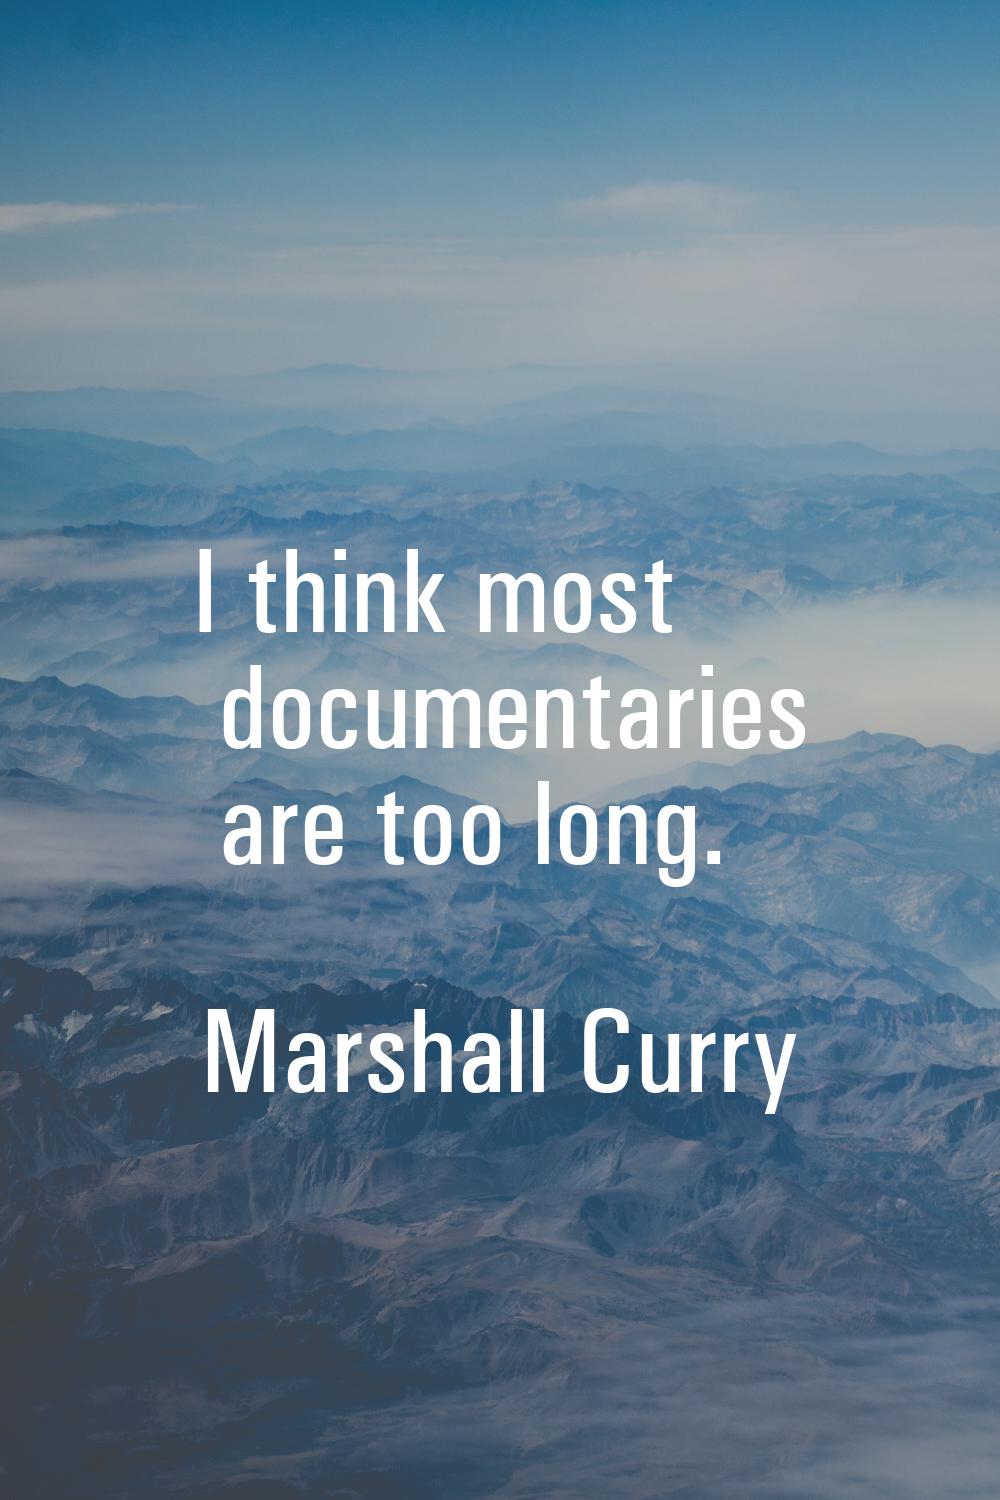 I think most documentaries are too long.